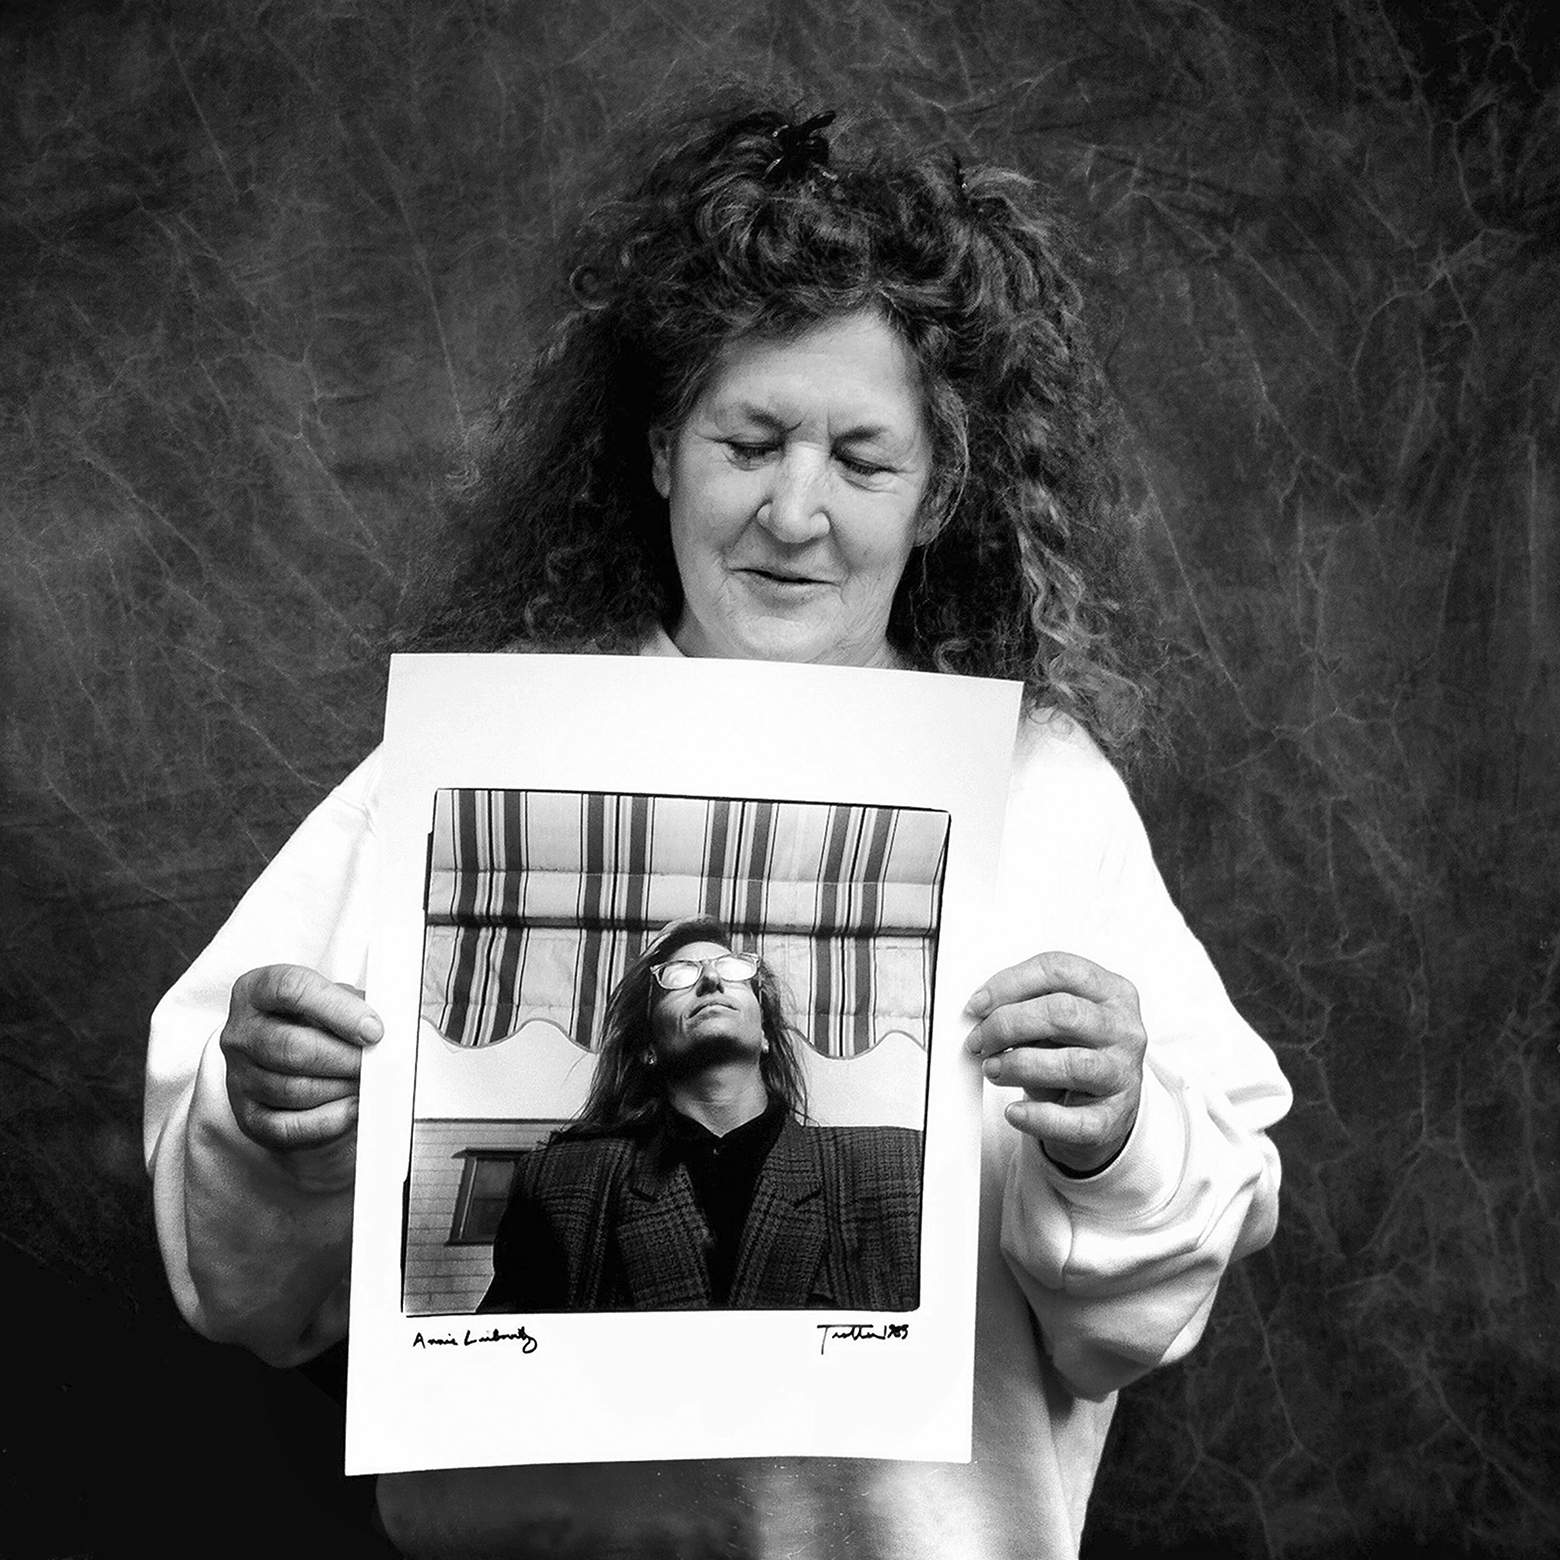 A woman wearing a white sweatshirt with thick, curly, long hair in clips slightly smiles with her eyes closed as she holds up a photograph of Annie Leibovitz in a plaid jacket with shoulder pads taken in front of the Baker Gallery by John Trotter in 1985.